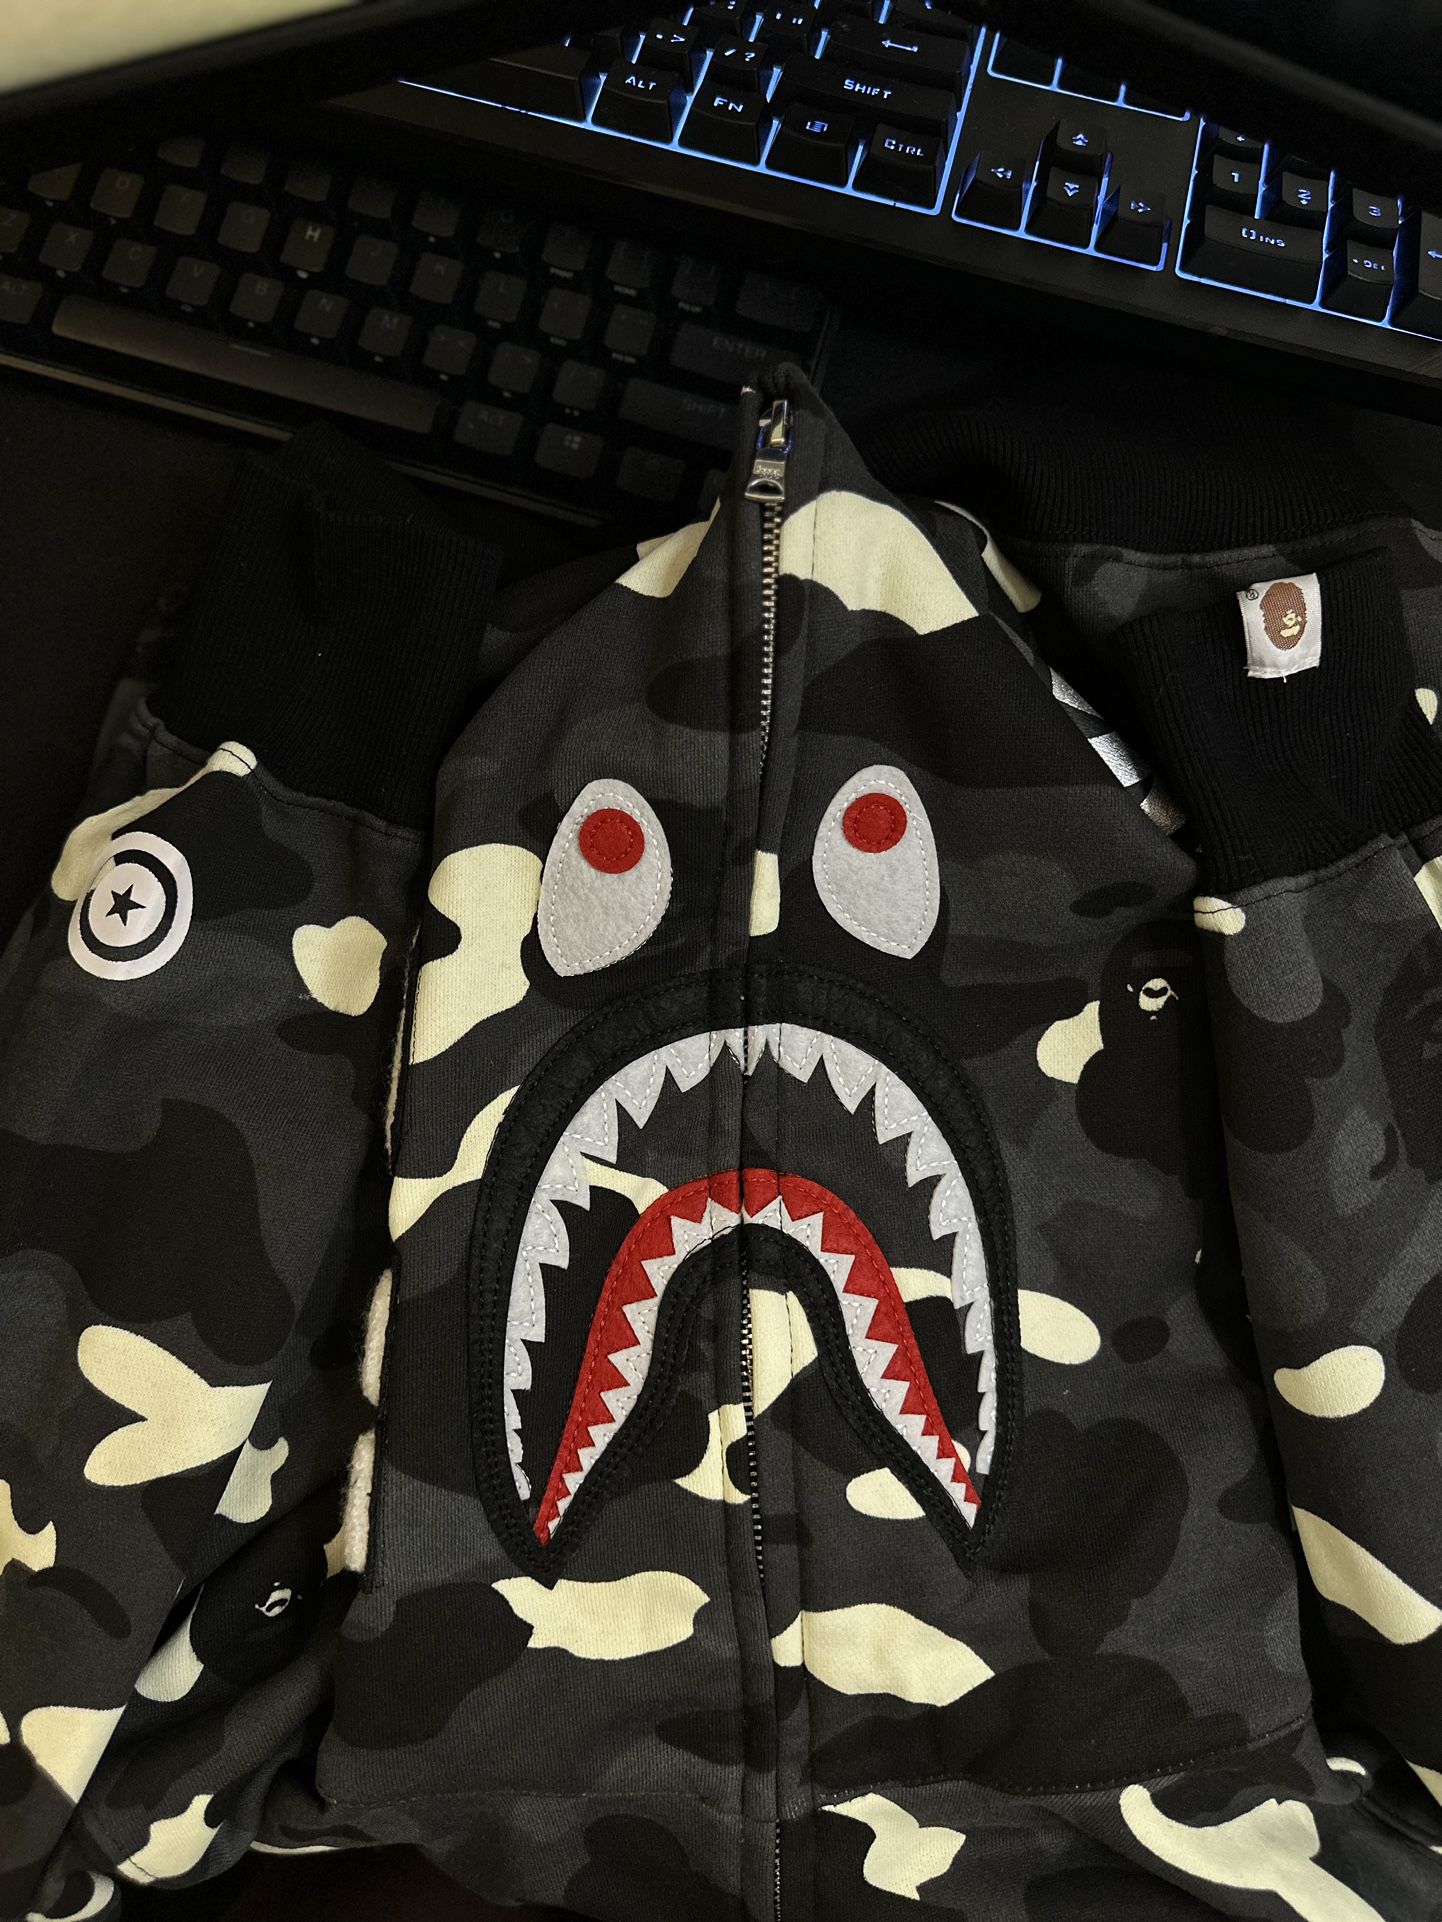 TOPAHK7 Hoodie for Sale in New York, NY - OfferUp